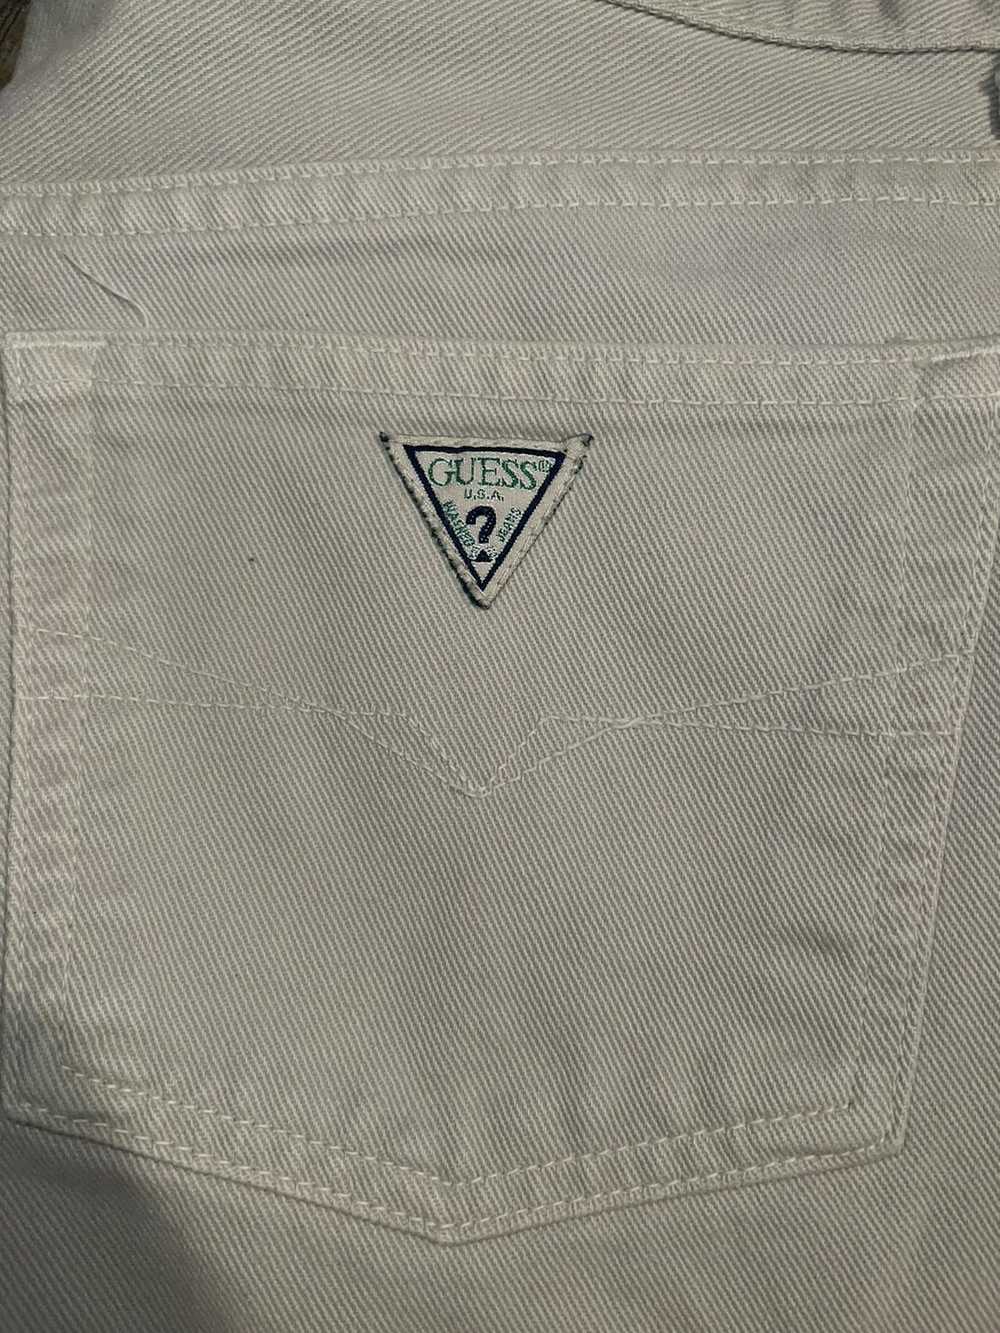 Guess White/cream vintage guess jeans size 36W/30L - image 3